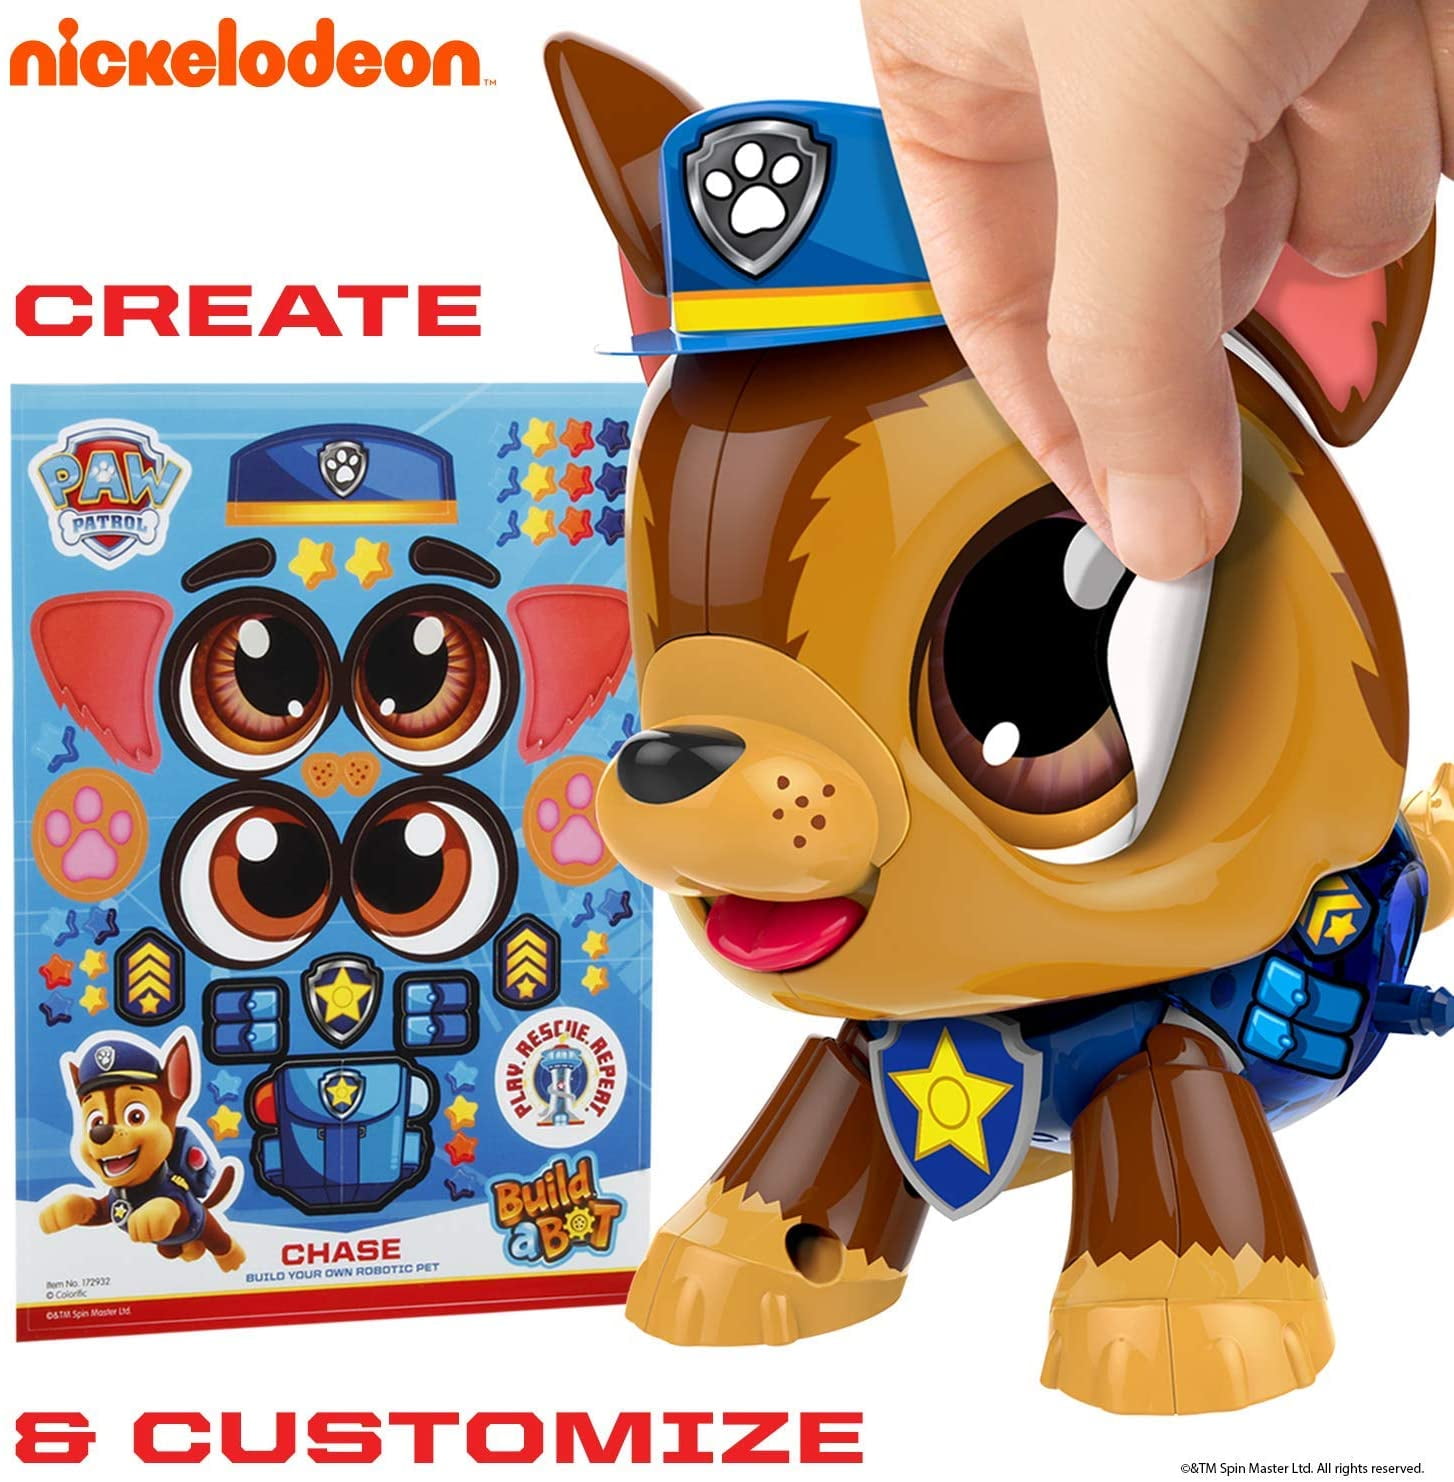 Paw Patrol Toys for Boys Chase - Build a Bot for Kids - Stem for Boys and Learning Toys Ages 3-10 - Walmart.com